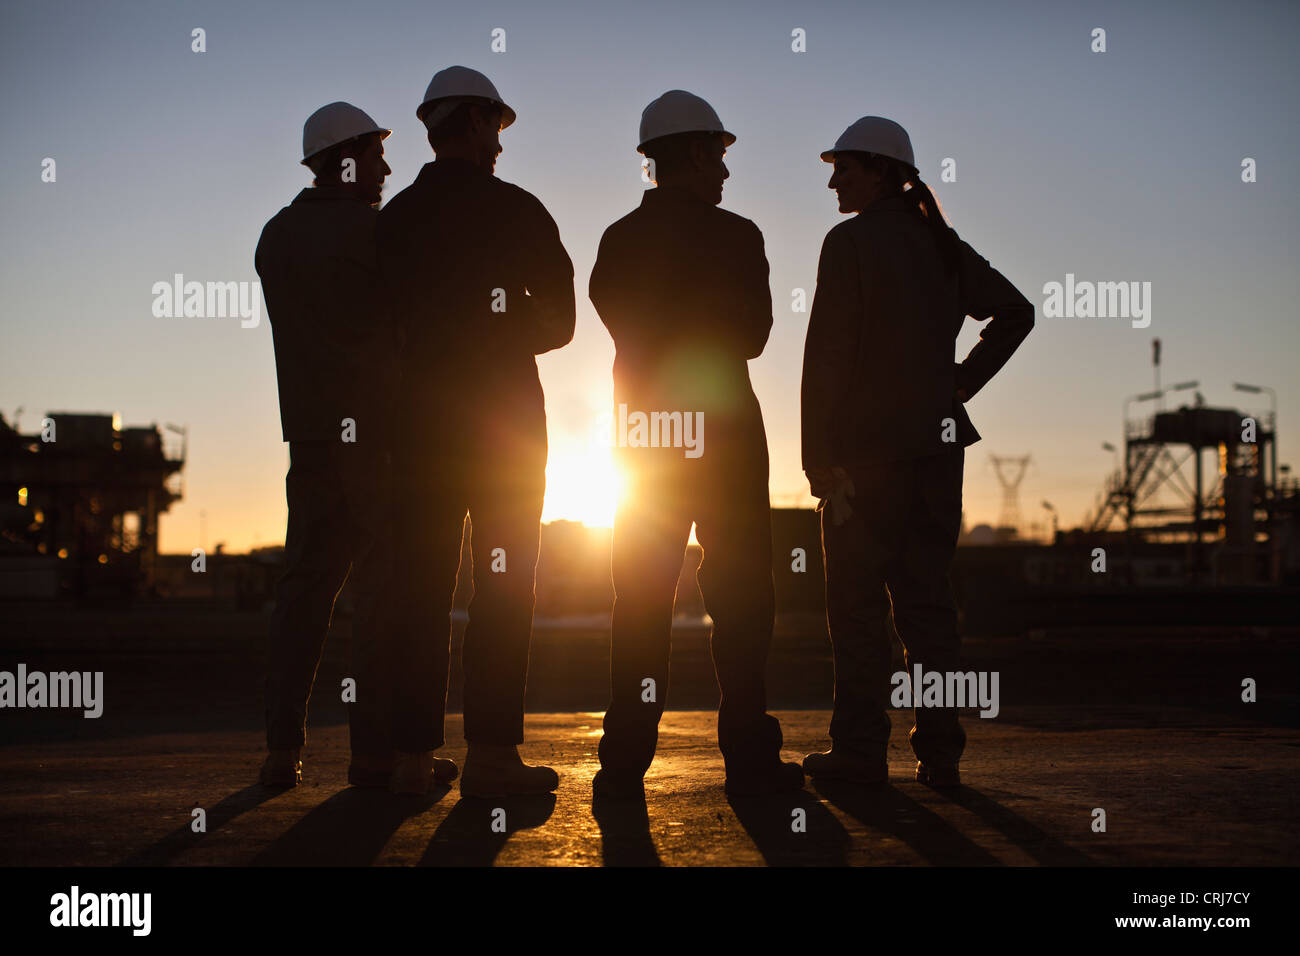 Silhouette of workers at oil refinery Stock Photo